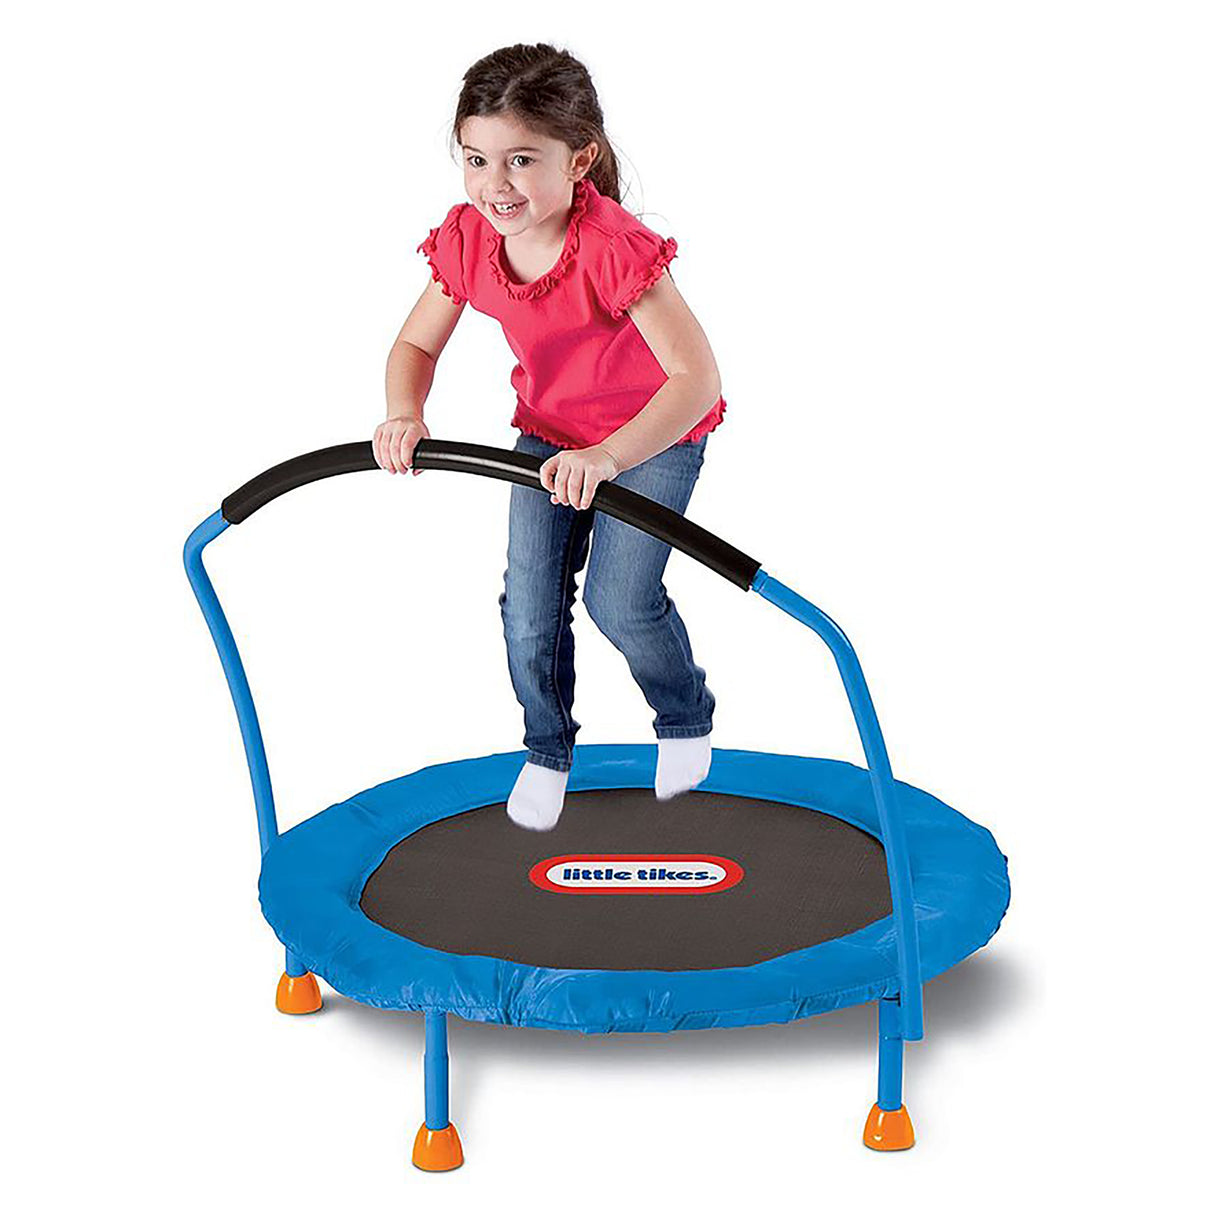 Little Tikes Easy Store Trampoline (90 cms)